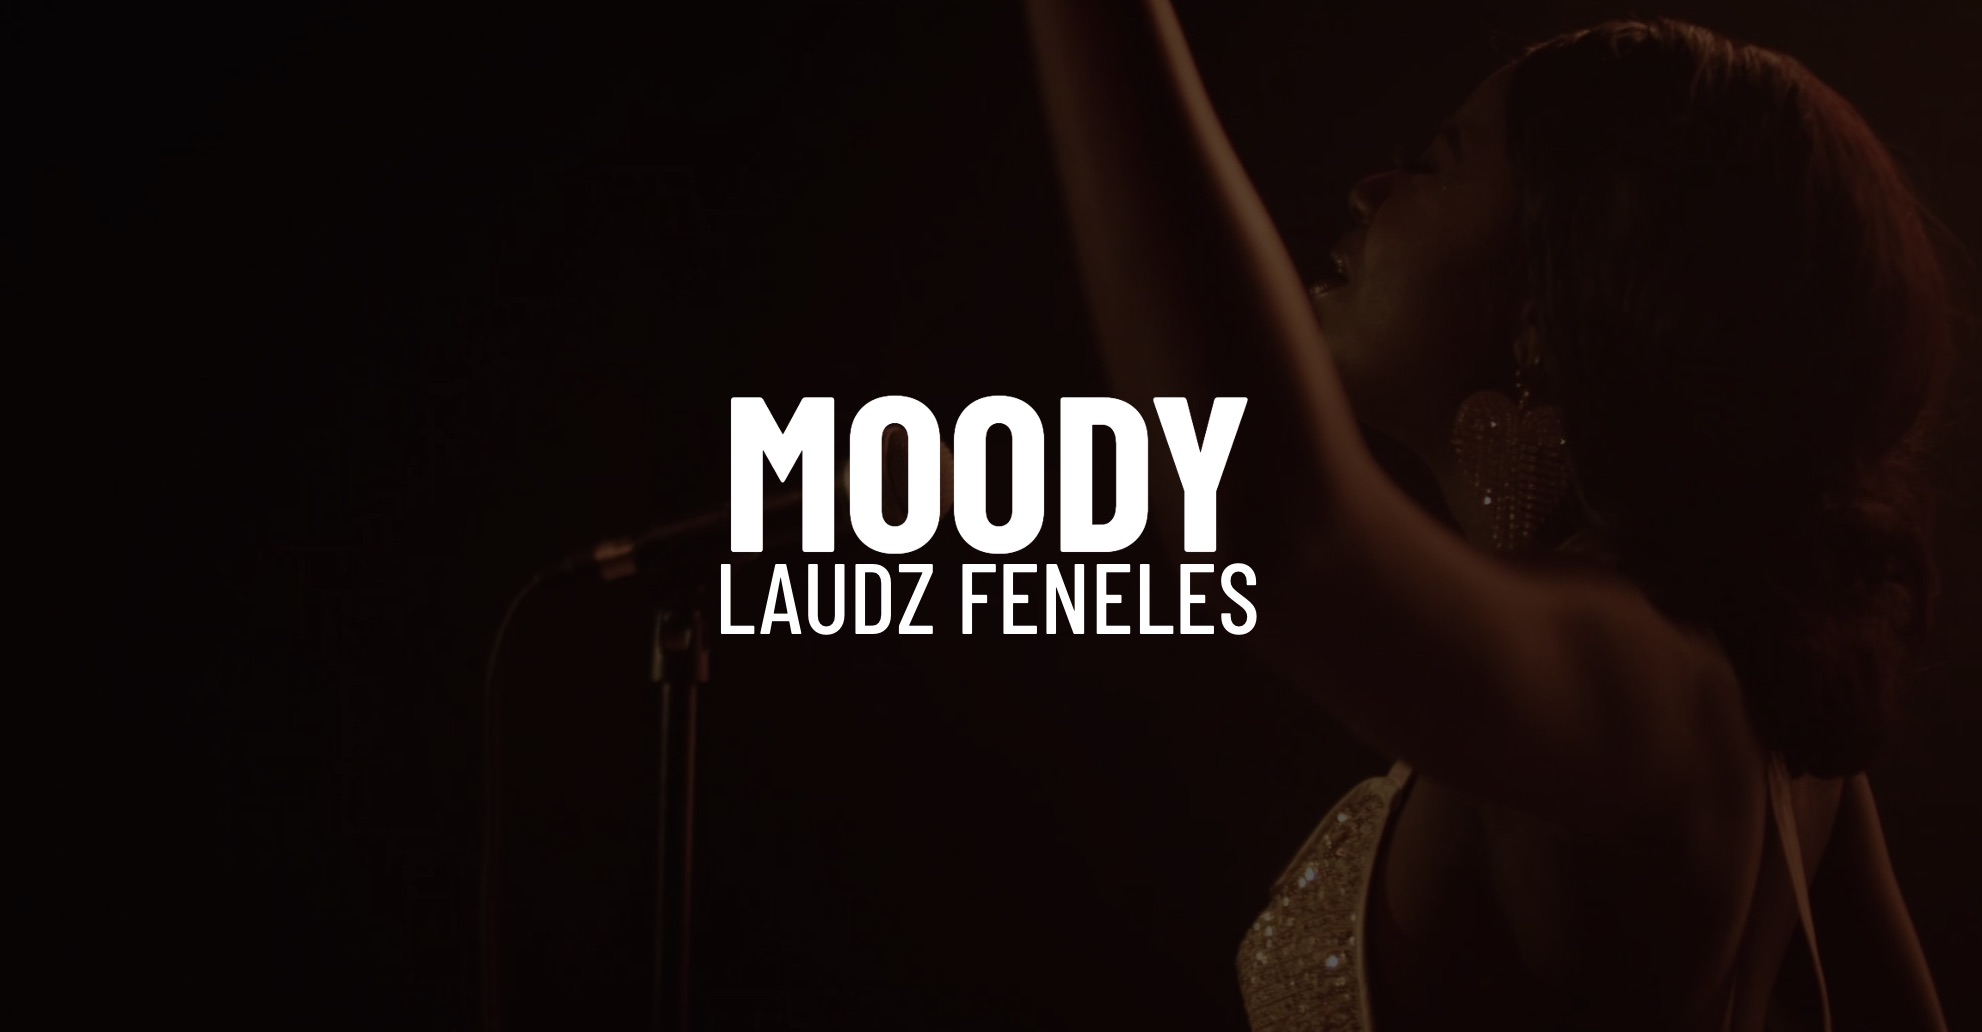 IU C&I Studios Page White Moody Laudz Feneles title on background headshot of her singing with arm in the air